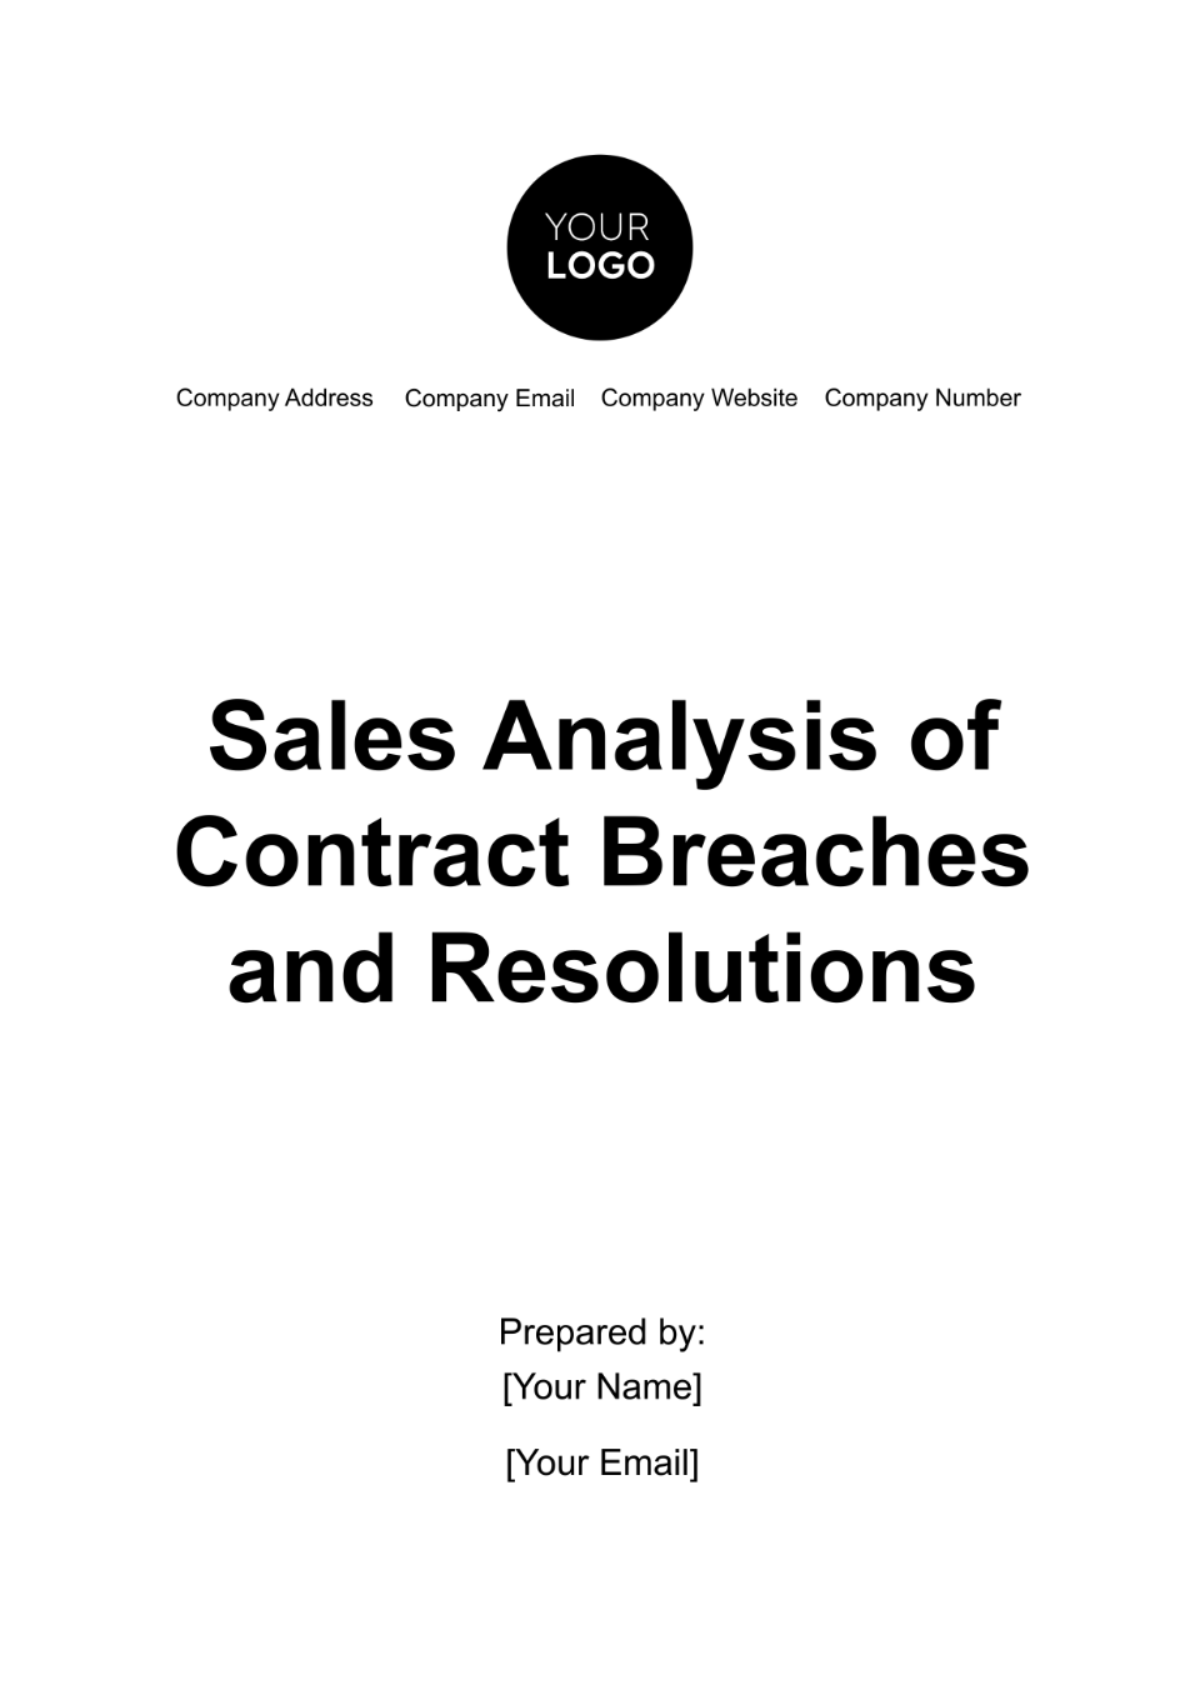 Free Sales Analysis of Contract Breaches and Resolutions Template